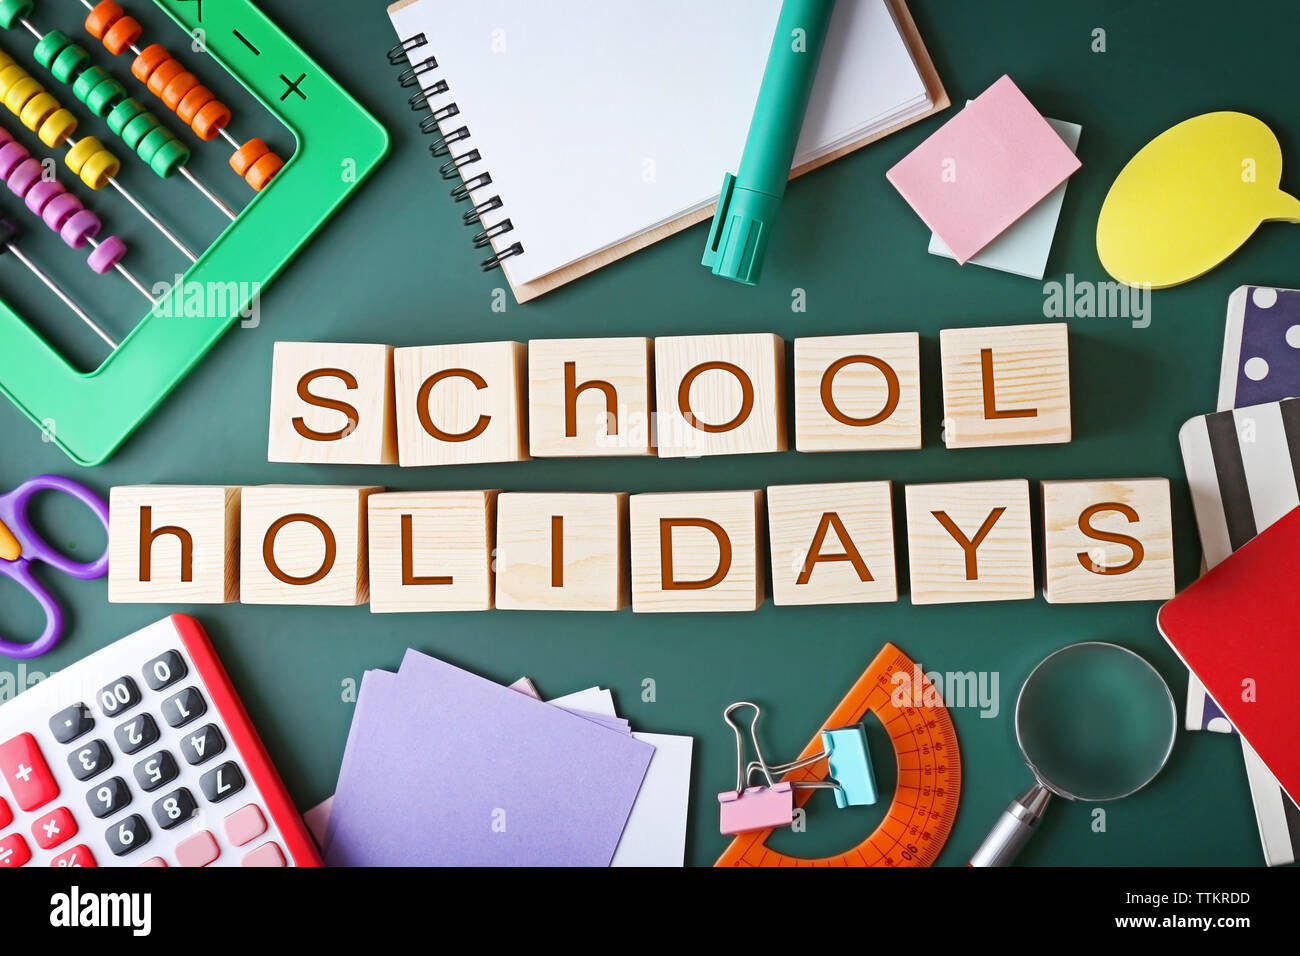 Colourful stationery and words SCHOOL HOLIDAYS on chalkboard Stock Photo